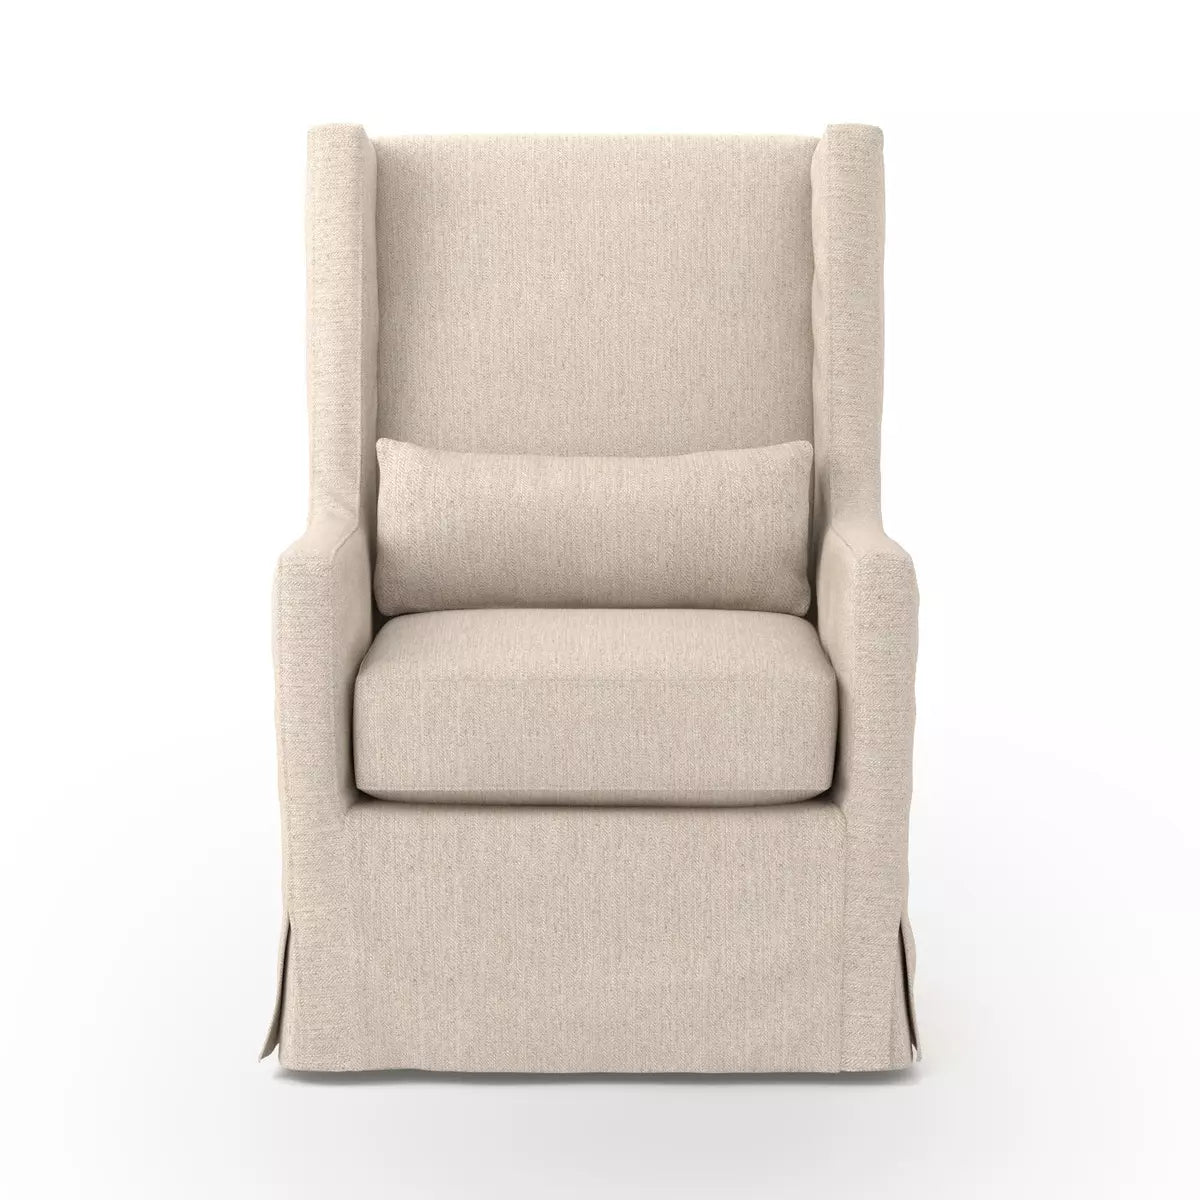 The Swivel Wing Chair